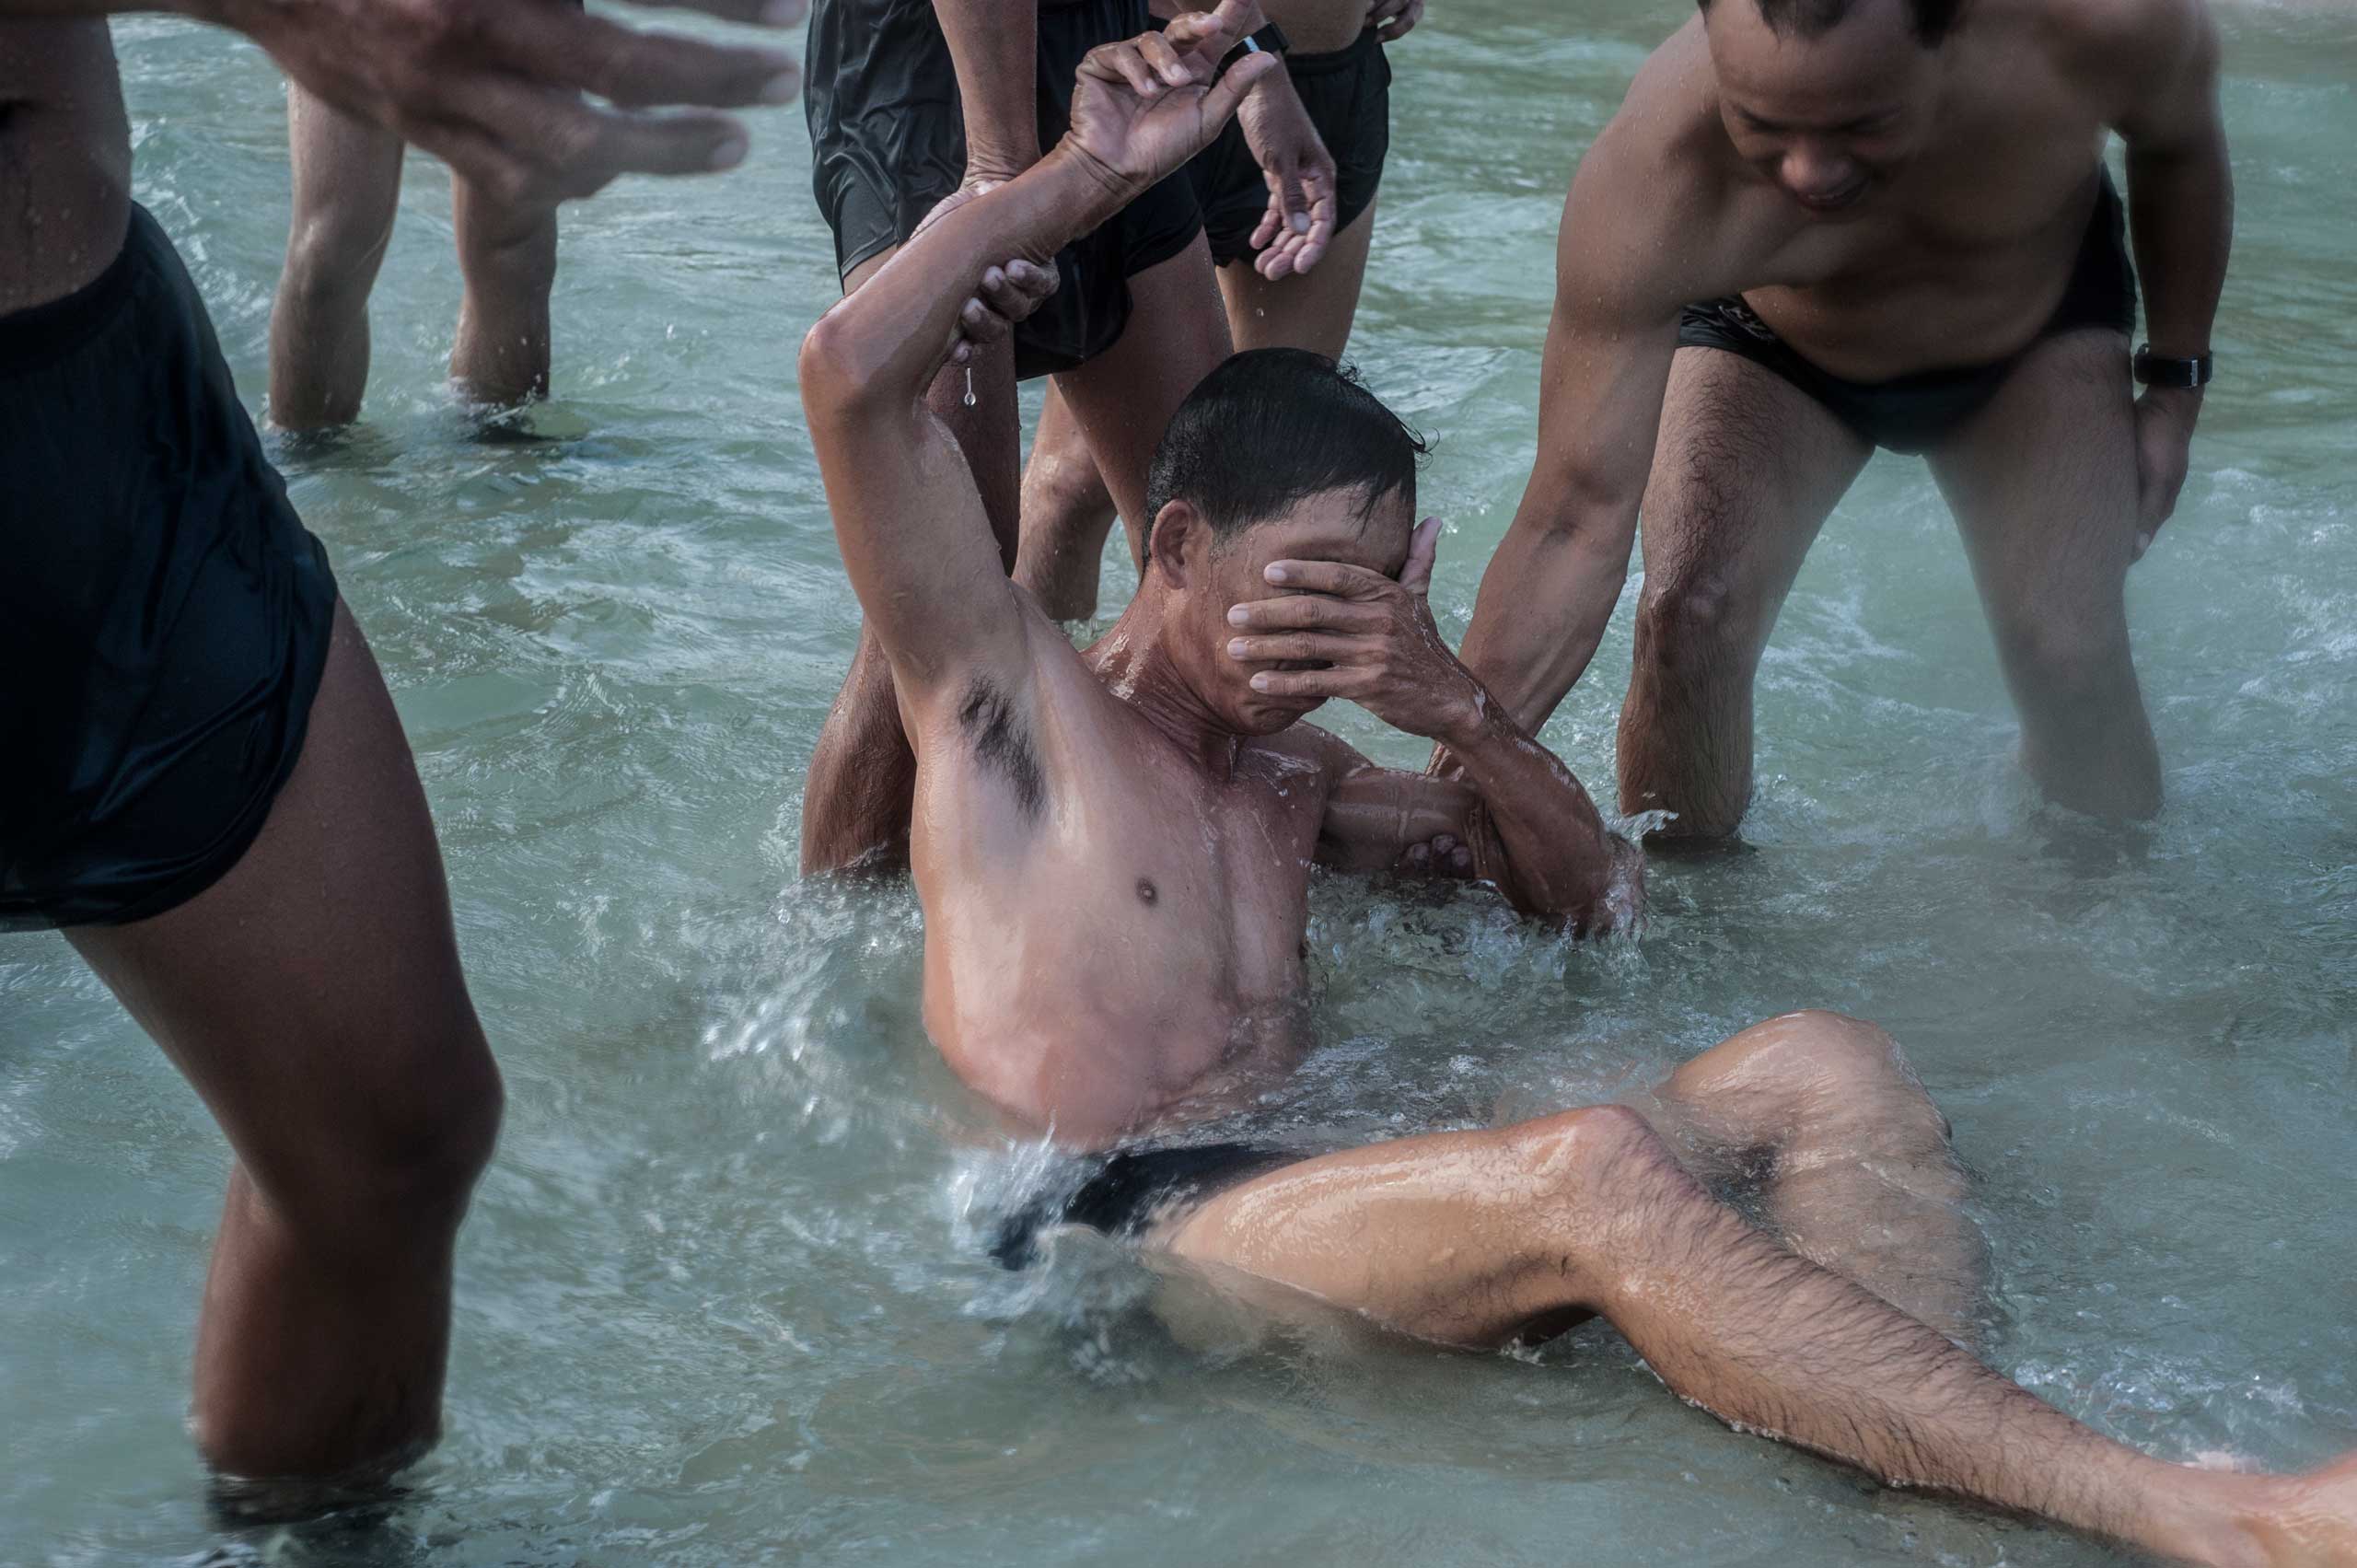 Heang Sambo, 38, collapses during an intense training session on the beach at Sihanoukville, Cambodia in April 2013. At the beginning of the training, many of the now divers could not swim. Now divers swim regularly and conduct daily physical training. Sambo, who is not a full-time member of the team but trains alongside them, works as a detection specialist and has worked all over the world identifying UXO.